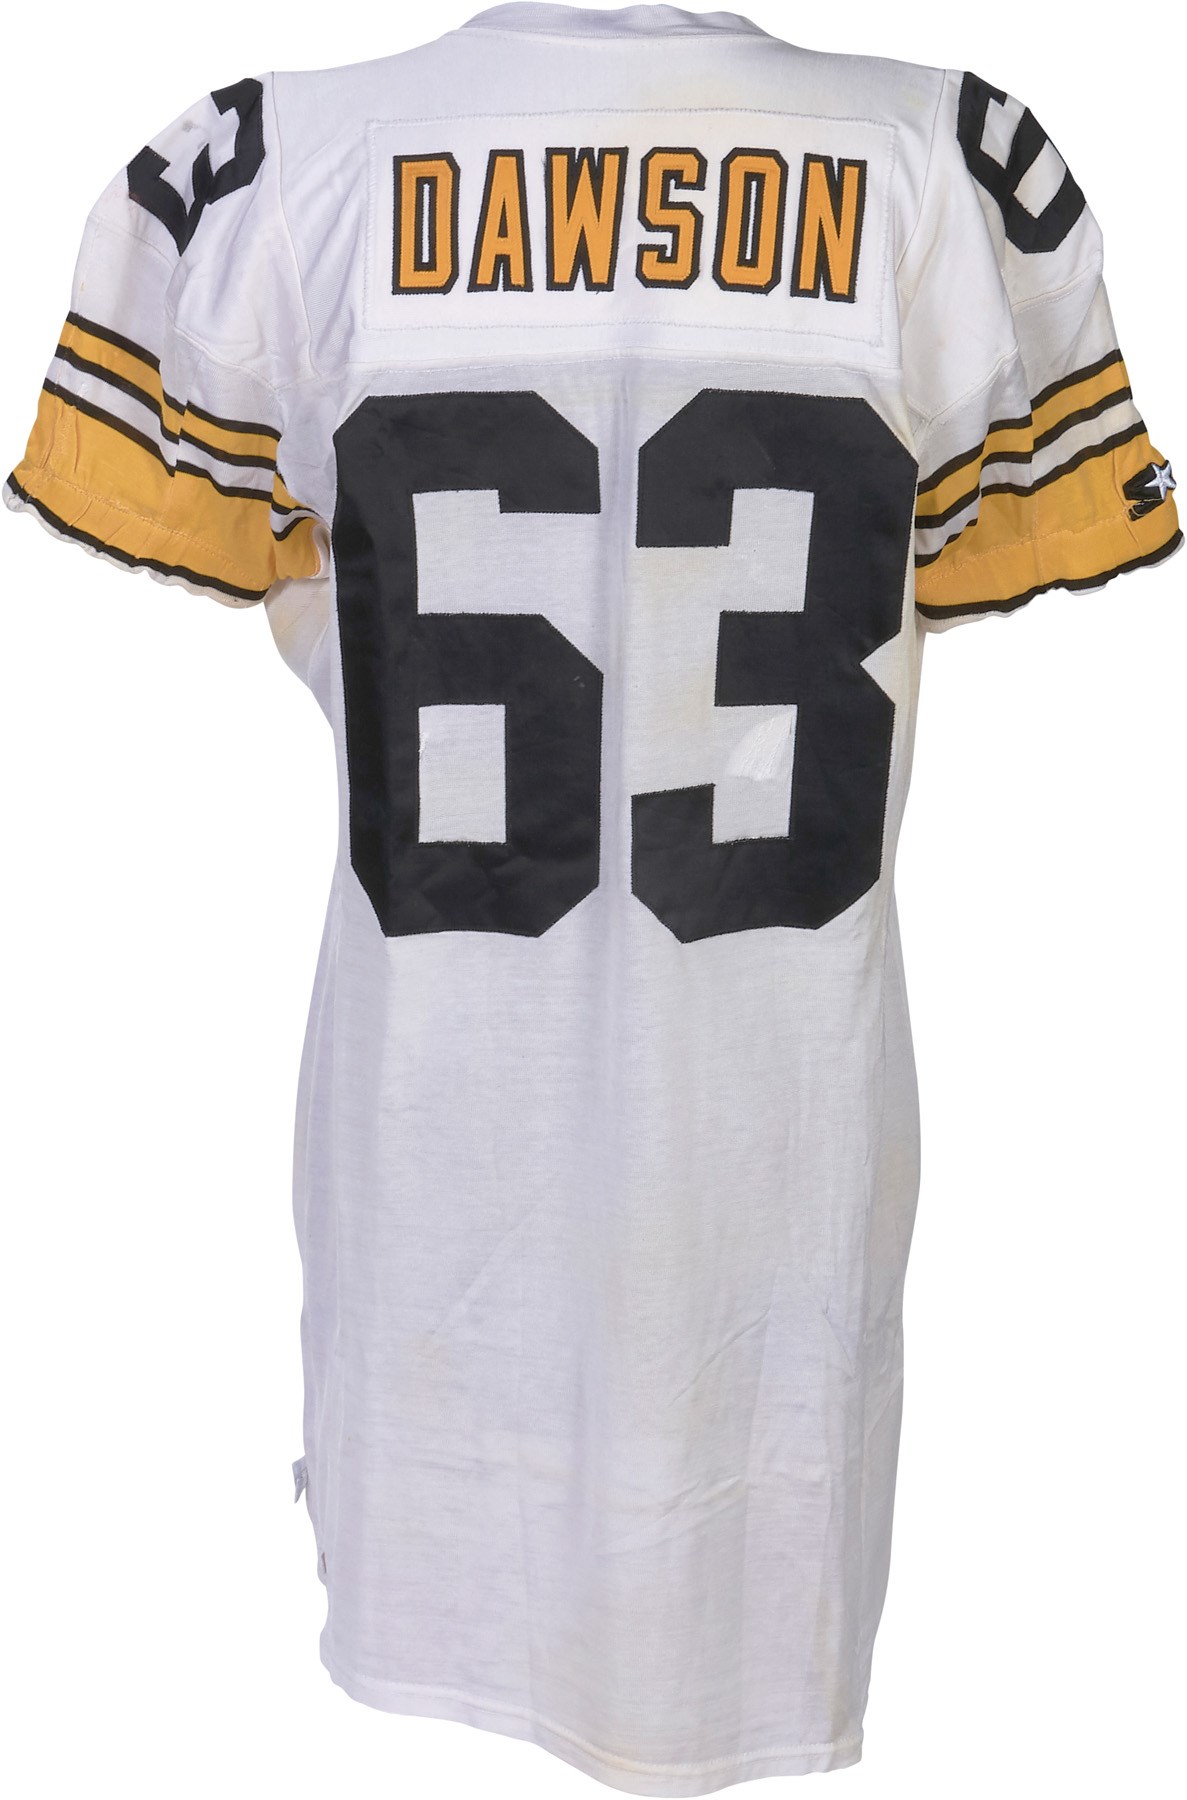 The Pittsburgh Steelers Game Worn Jersey Archive - 1993 Dermontti Dawson Pittsburgh Steelers Game Worn Jersey (Photo-Matched)